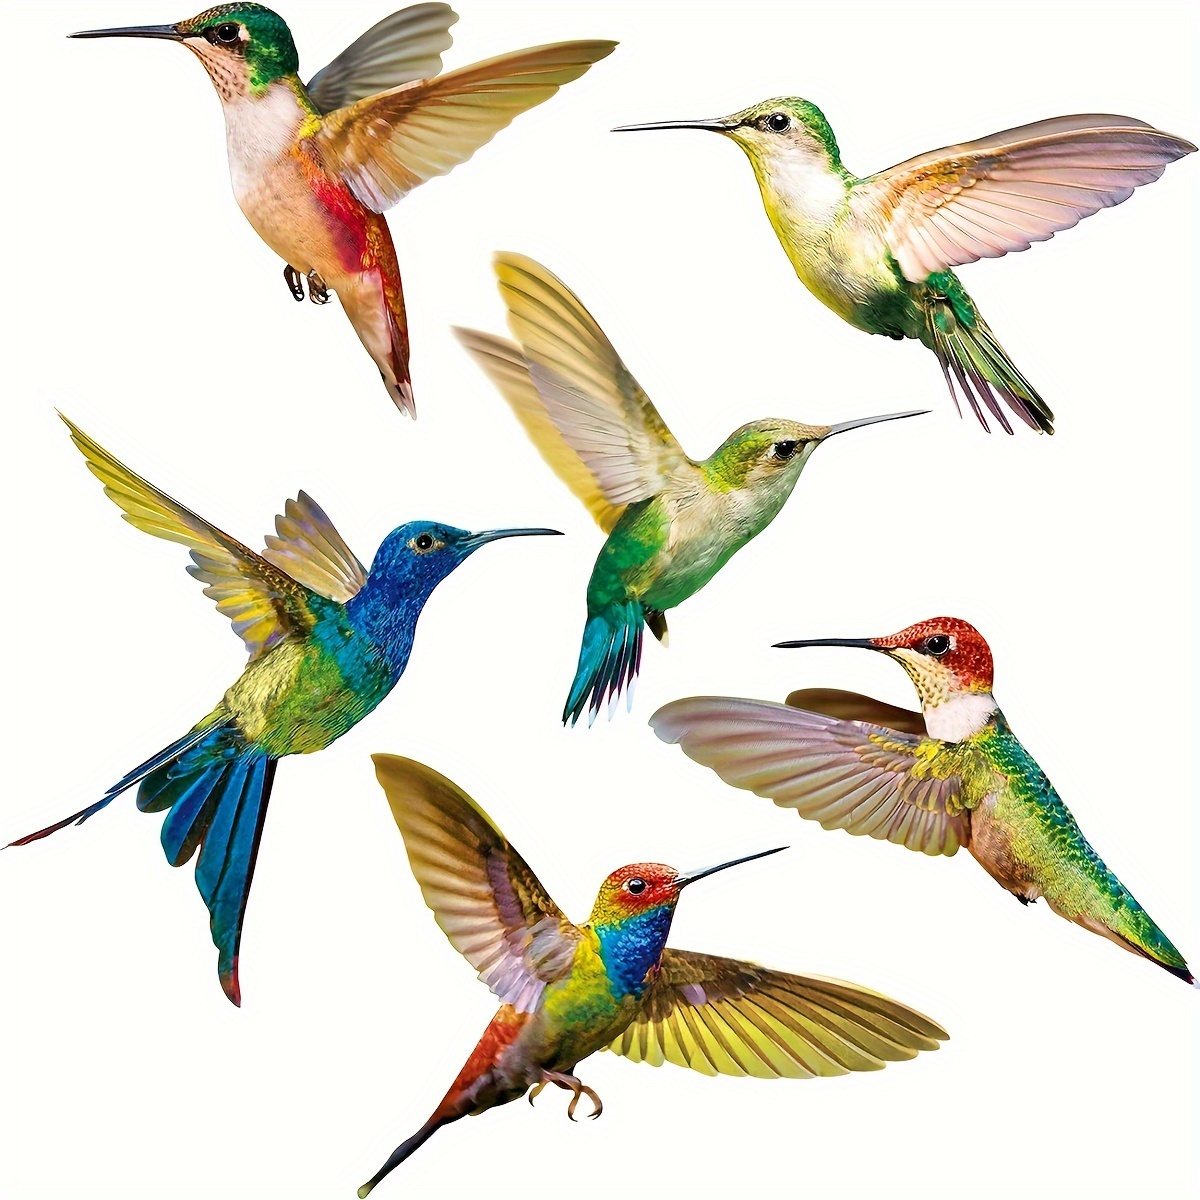 

6pcs/set Artistic Pvc Window Decal, Realistic Hummingbird Mural, Self-adhesive Wall Art Sticker For Bedroom, Entryway, Living Room, Office, Porch, Background Wall Decor, Home Decoration